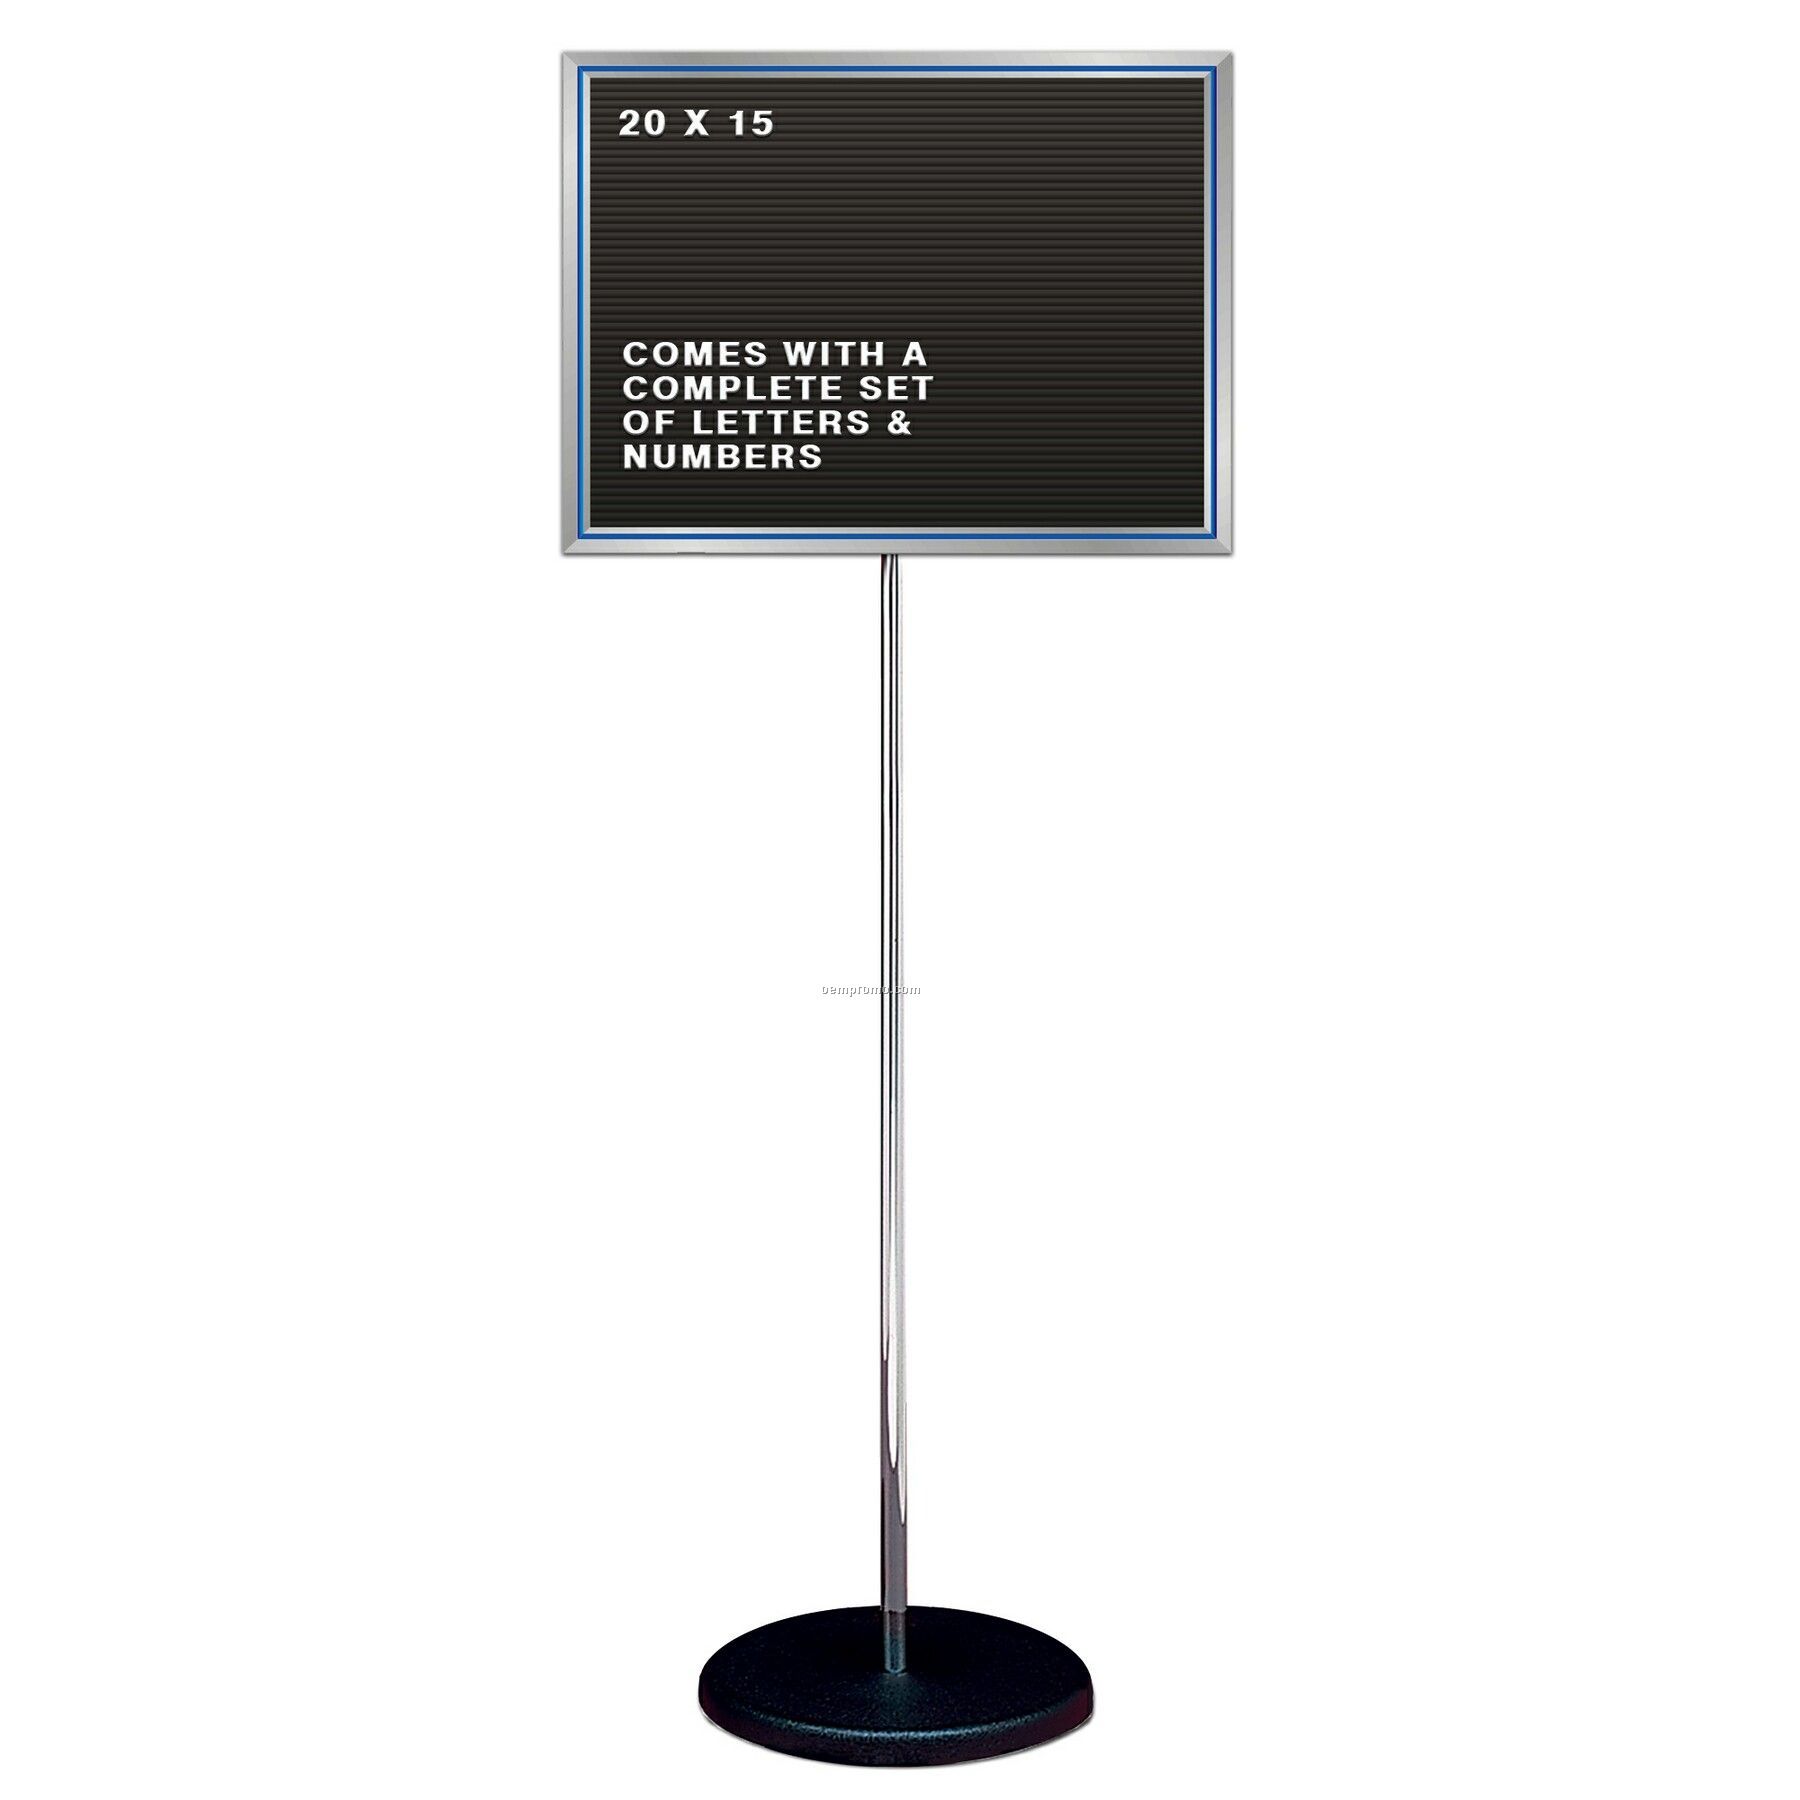 Free Standing Changeable Letter Board W/ Chrome Pole Stand (20